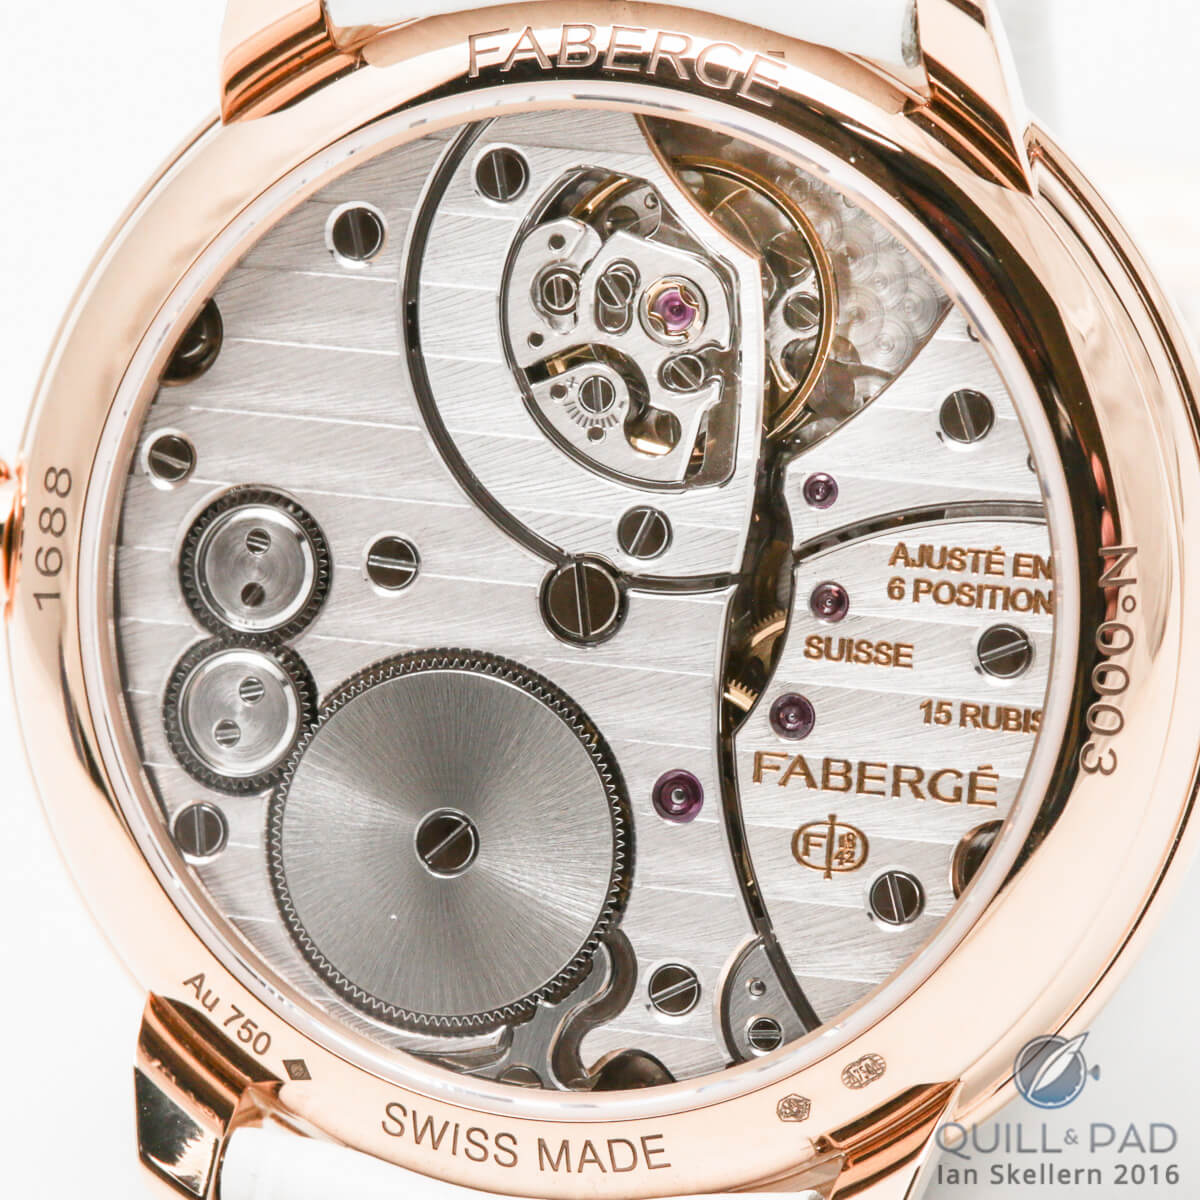 View through the display back of the Fabergé Lady Levity to reveal the beautifully finished Caliber AGH 6911 movement within